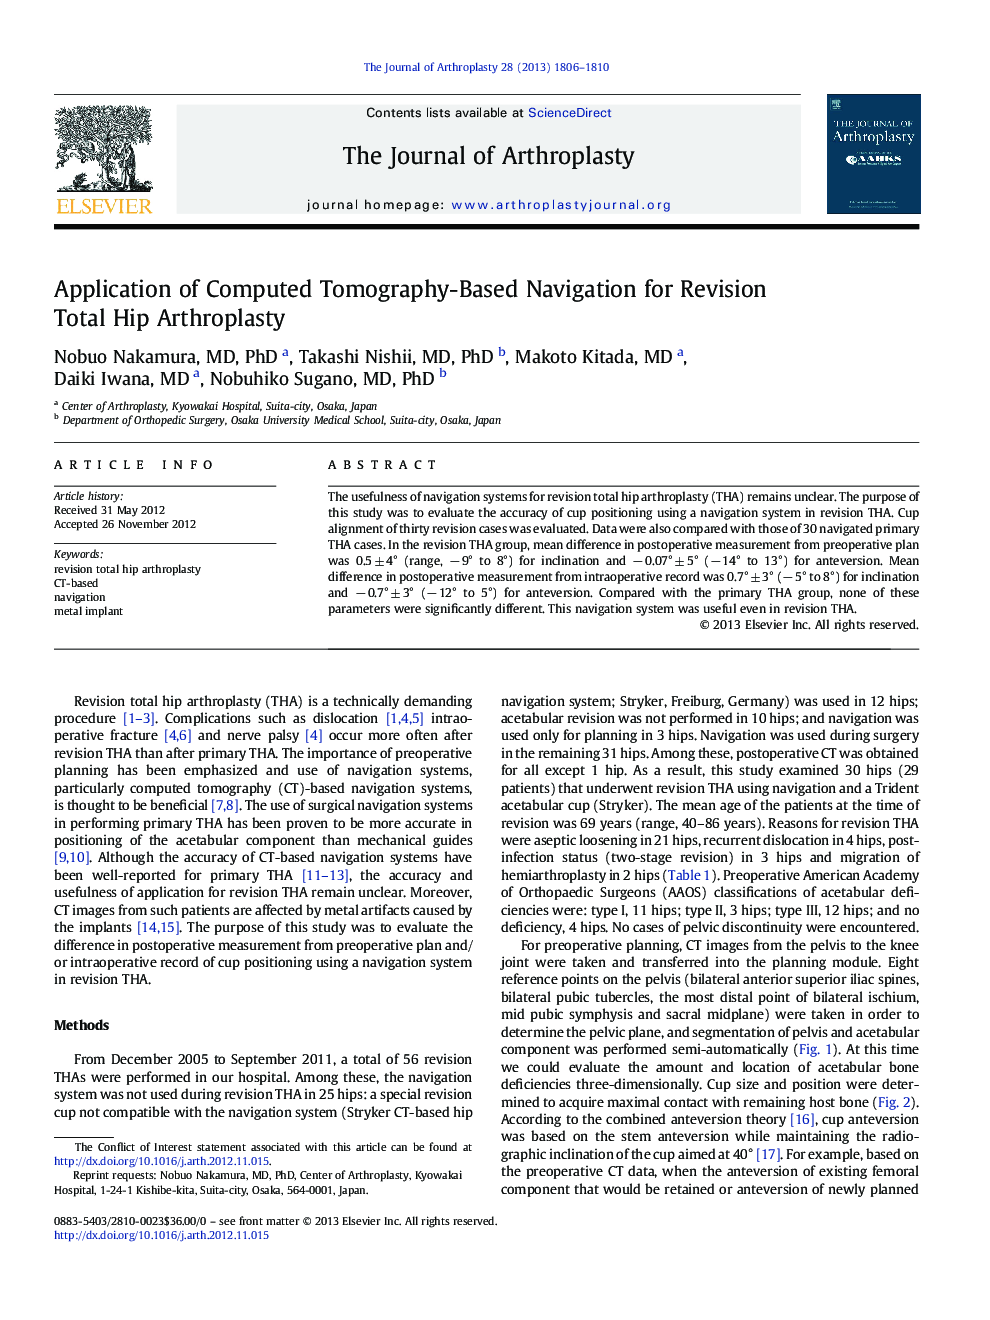 Application of Computed Tomography-Based Navigation for Revision Total Hip Arthroplasty 